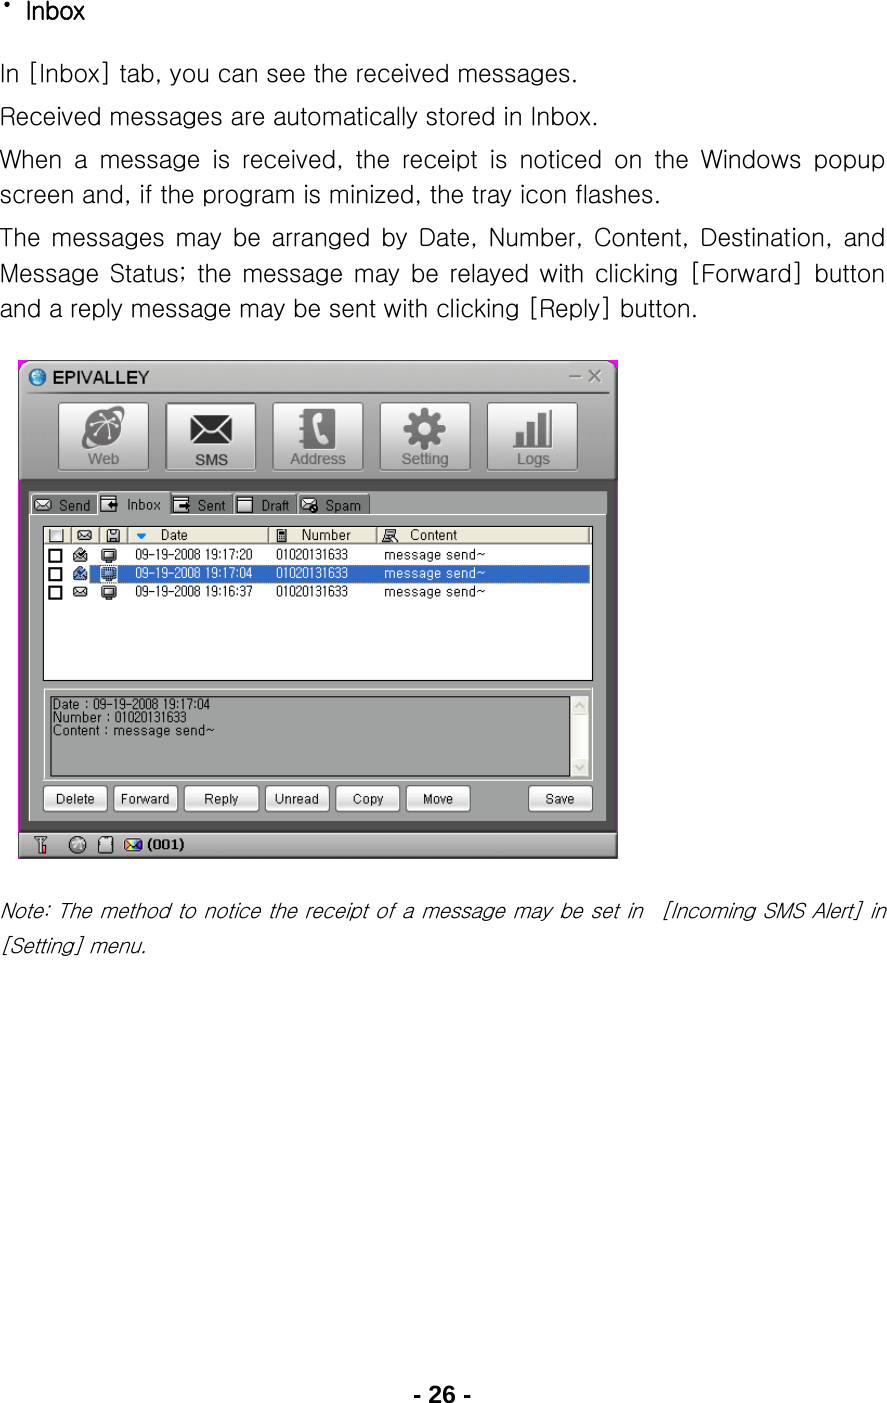 - 26 - · Inbox In [Inbox] tab, you can see the received messages. Received messages are automatically stored in Inbox. When  a  message  is  received,  the  receipt  is  noticed  on  the  Windows  popup screen and, if the program is minized, the tray icon flashes. The  messages  may  be  arranged  by  Date,  Number,  Content,  Destination,  and Message  Status; the  message  may  be  relayed with  clicking  [Forward]  button and a reply message may be sent with clicking [Reply] button.              Note: The method to notice the receipt of a message may be set in  [Incoming SMS Alert] in [Setting] menu.    